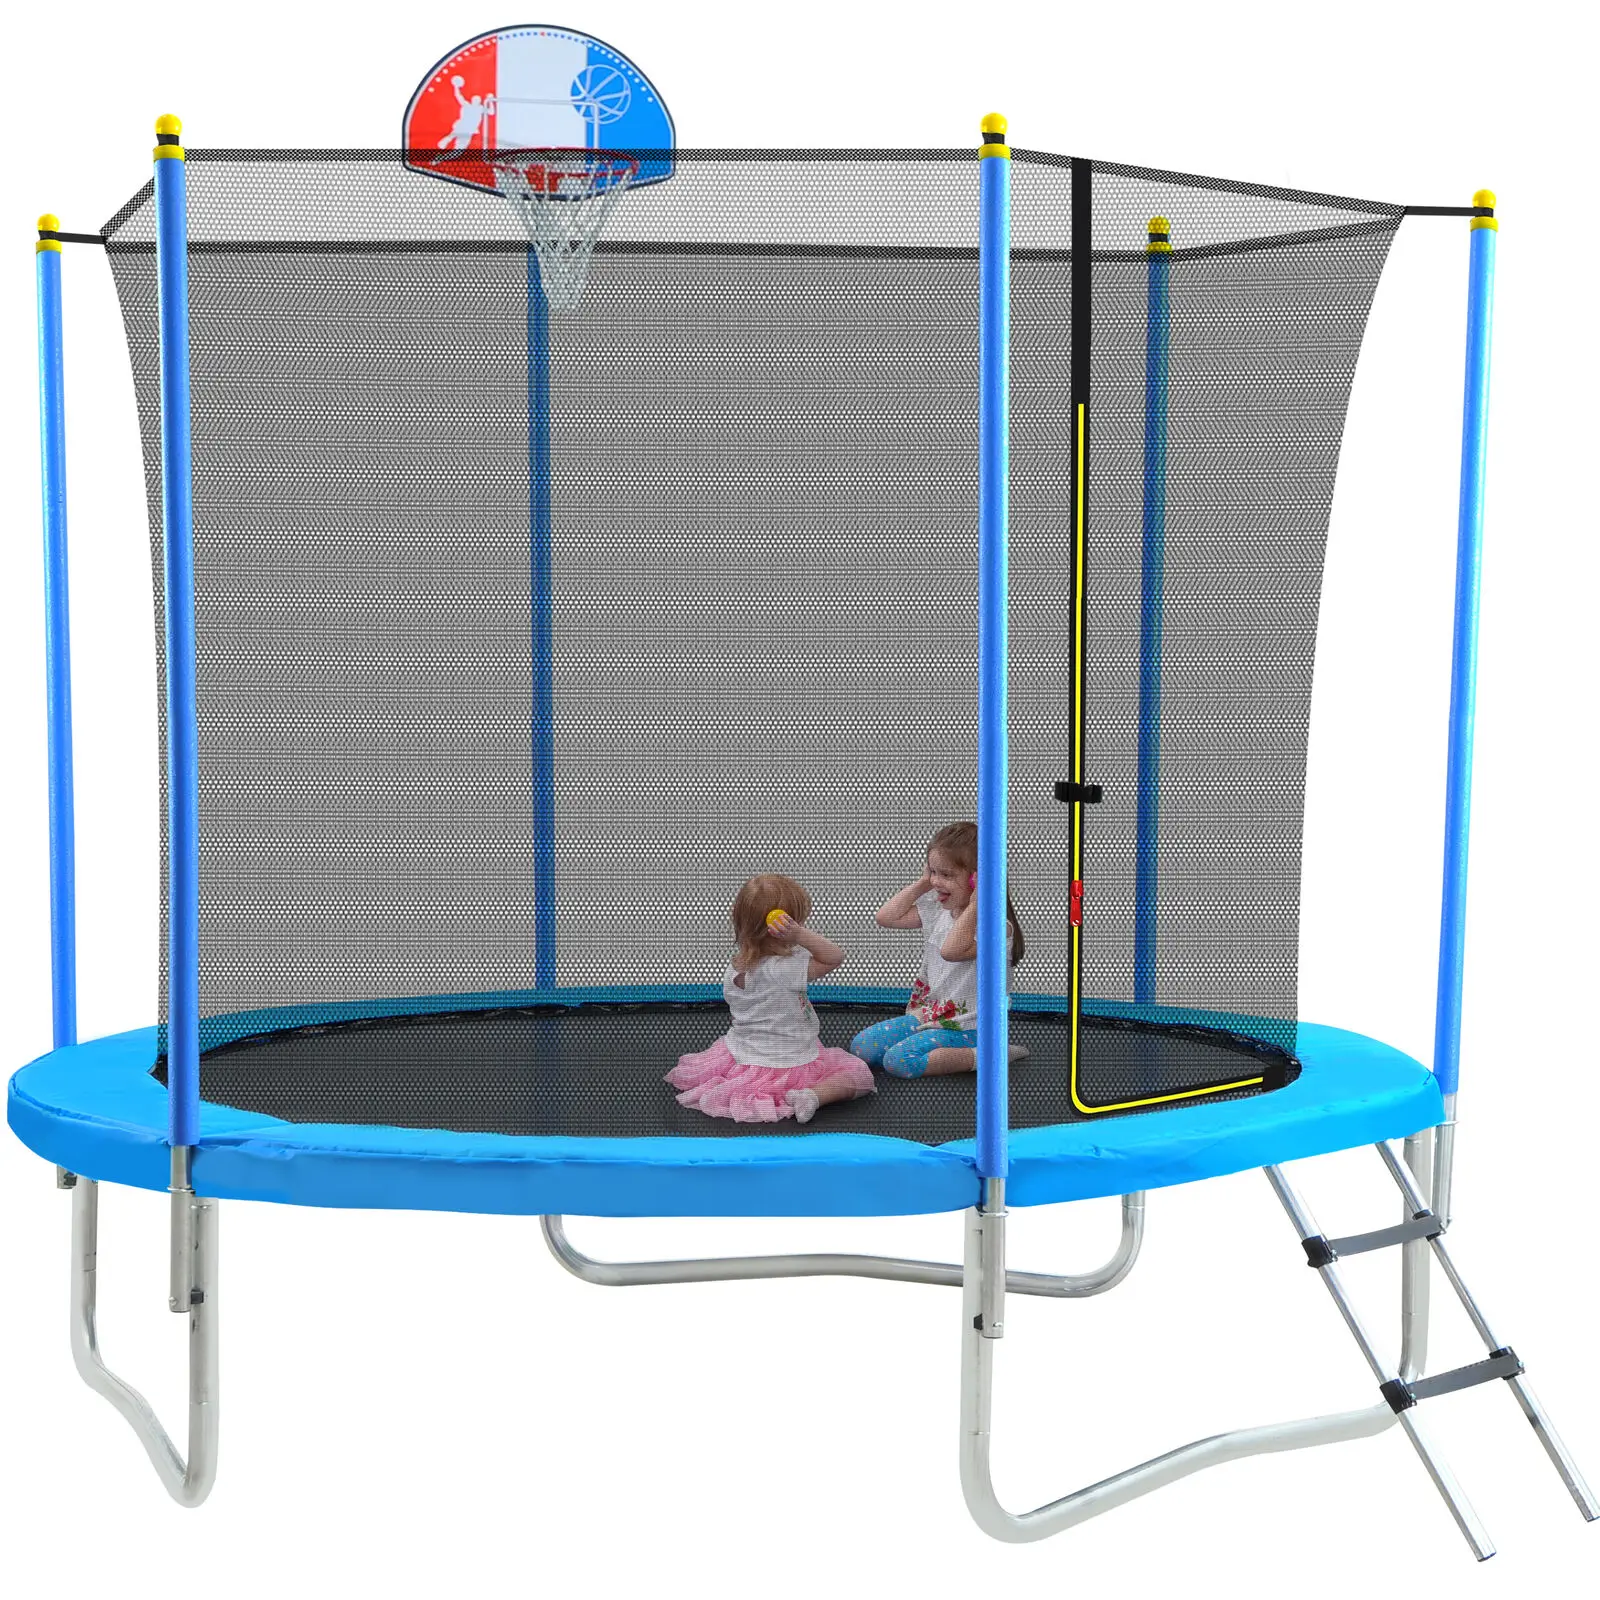 

8FT Trampoline for Kids with Safety Enclosure Net, Basketball Hoop and Ladder